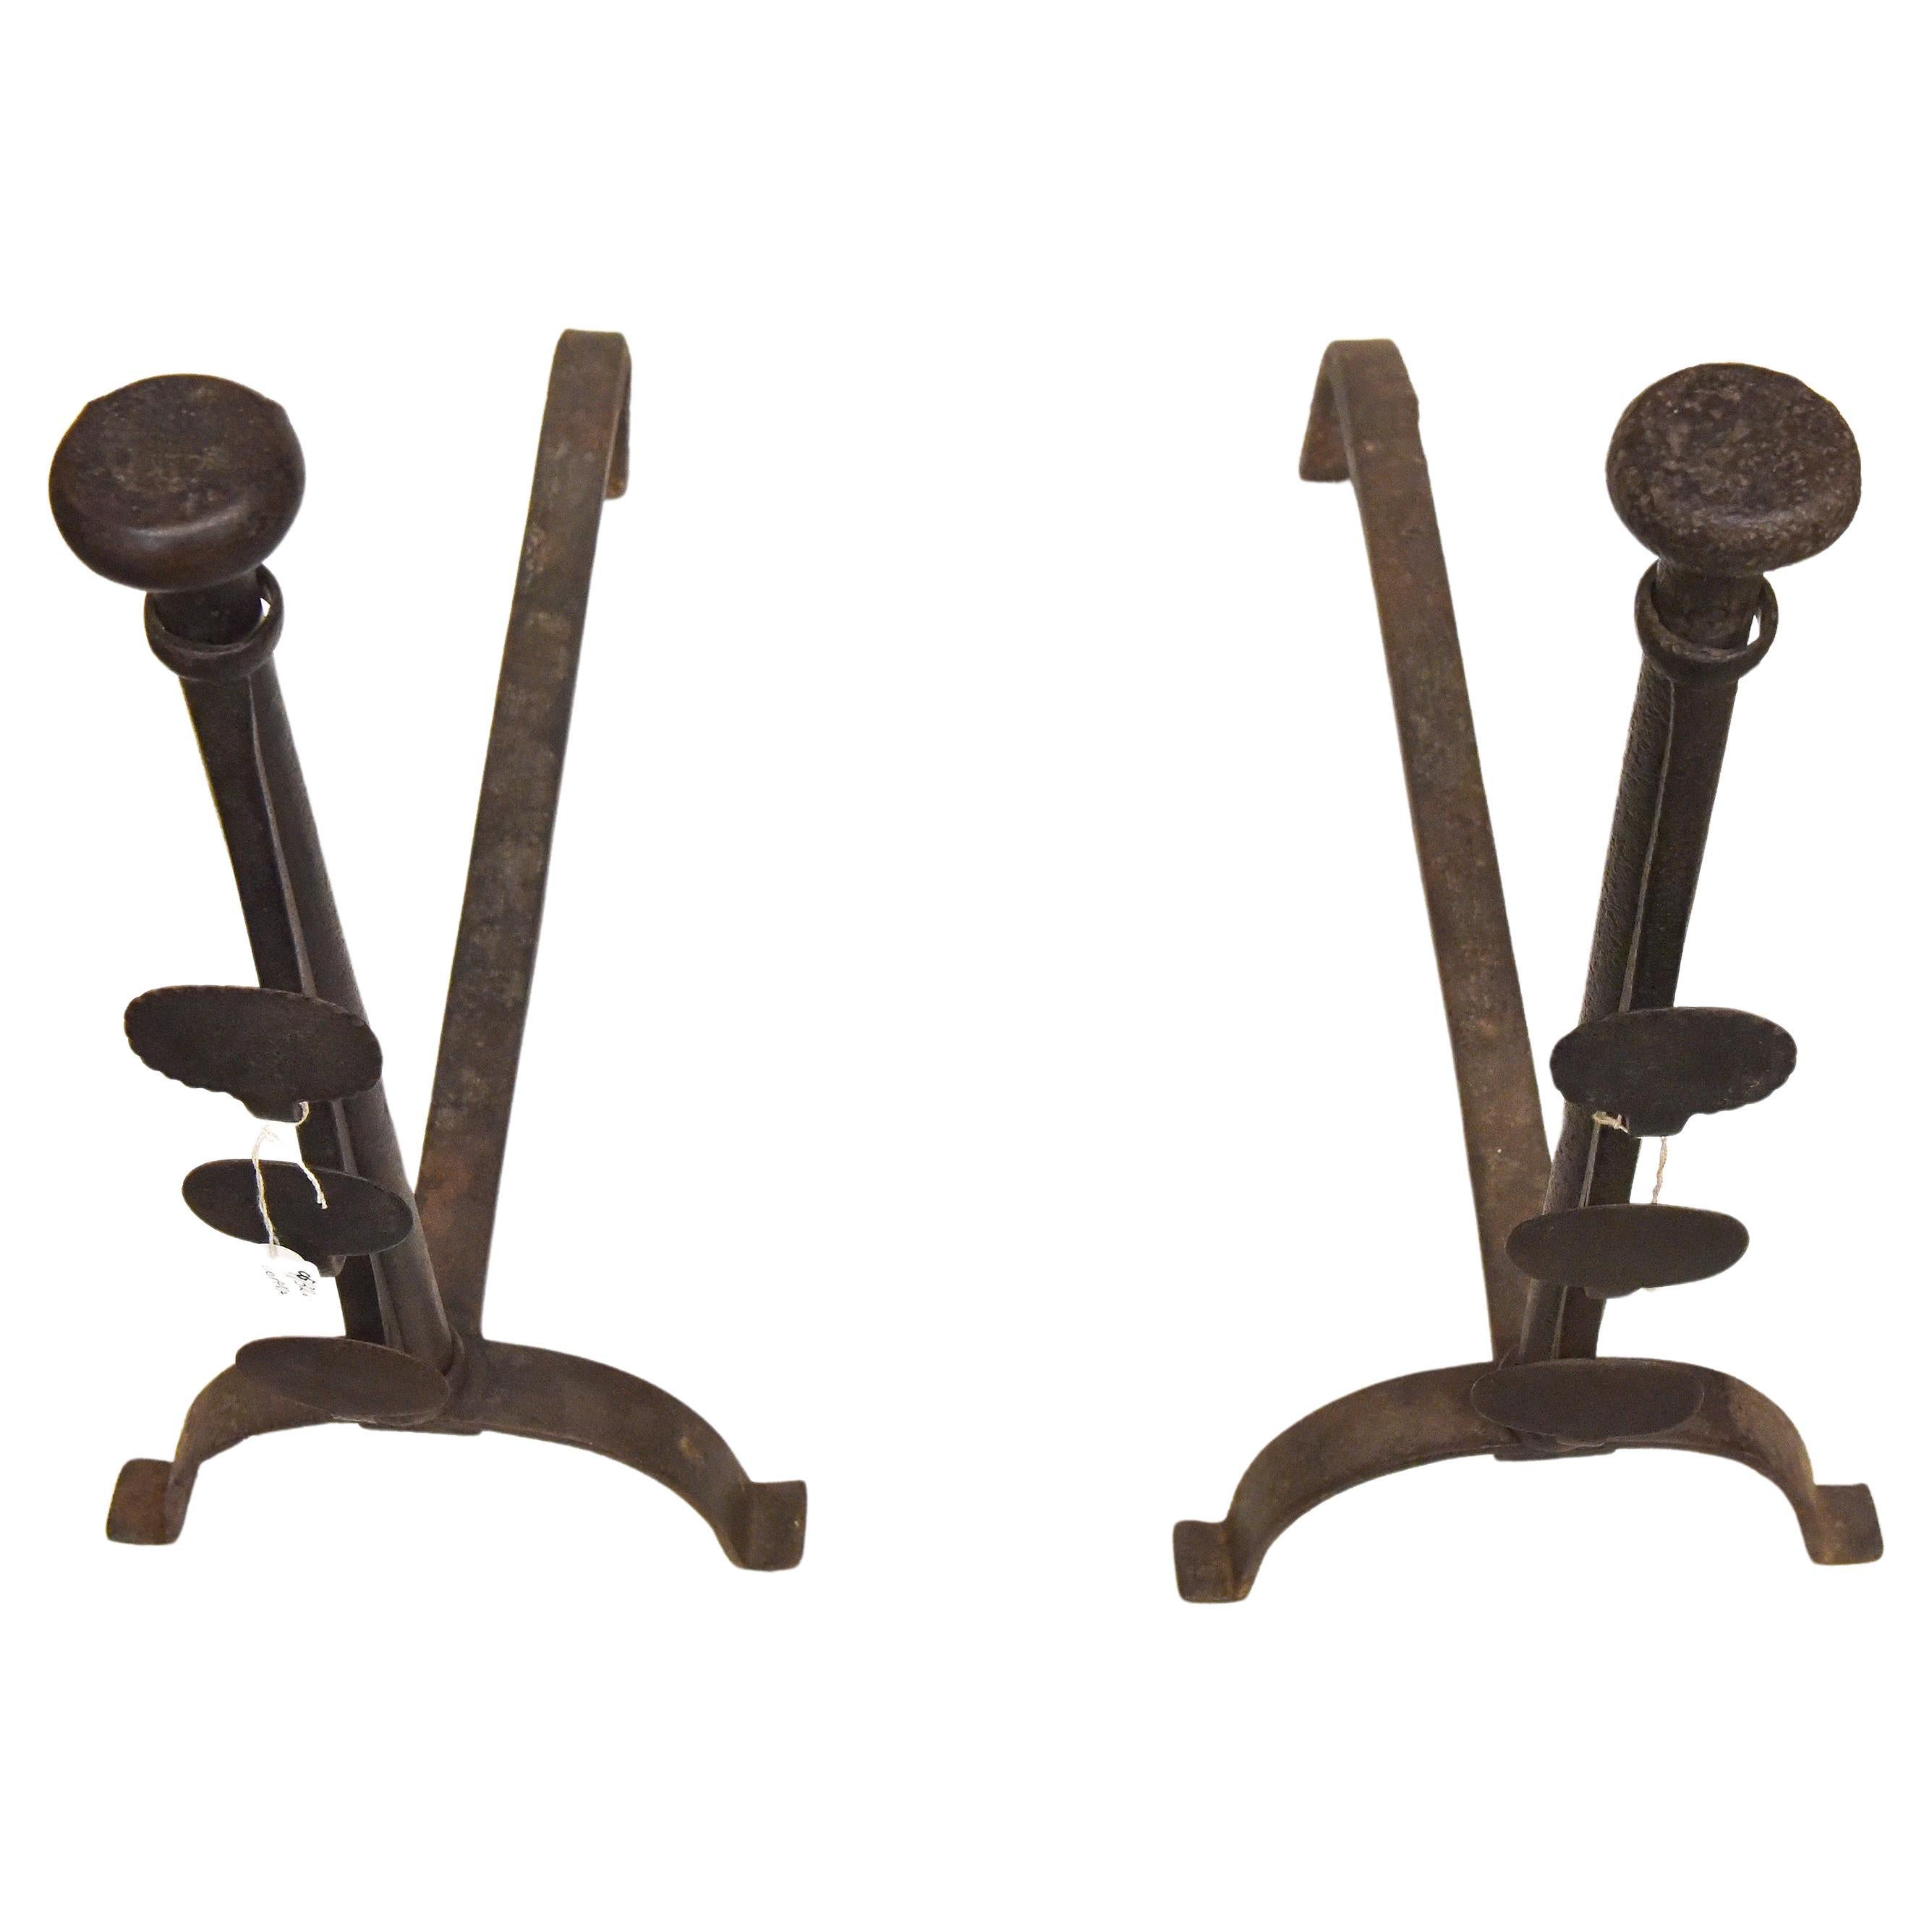 O/3265 - Pair of antique French andirons, rare because with adjustable supports for skewers: beautiful, functional, rare, with a good price.